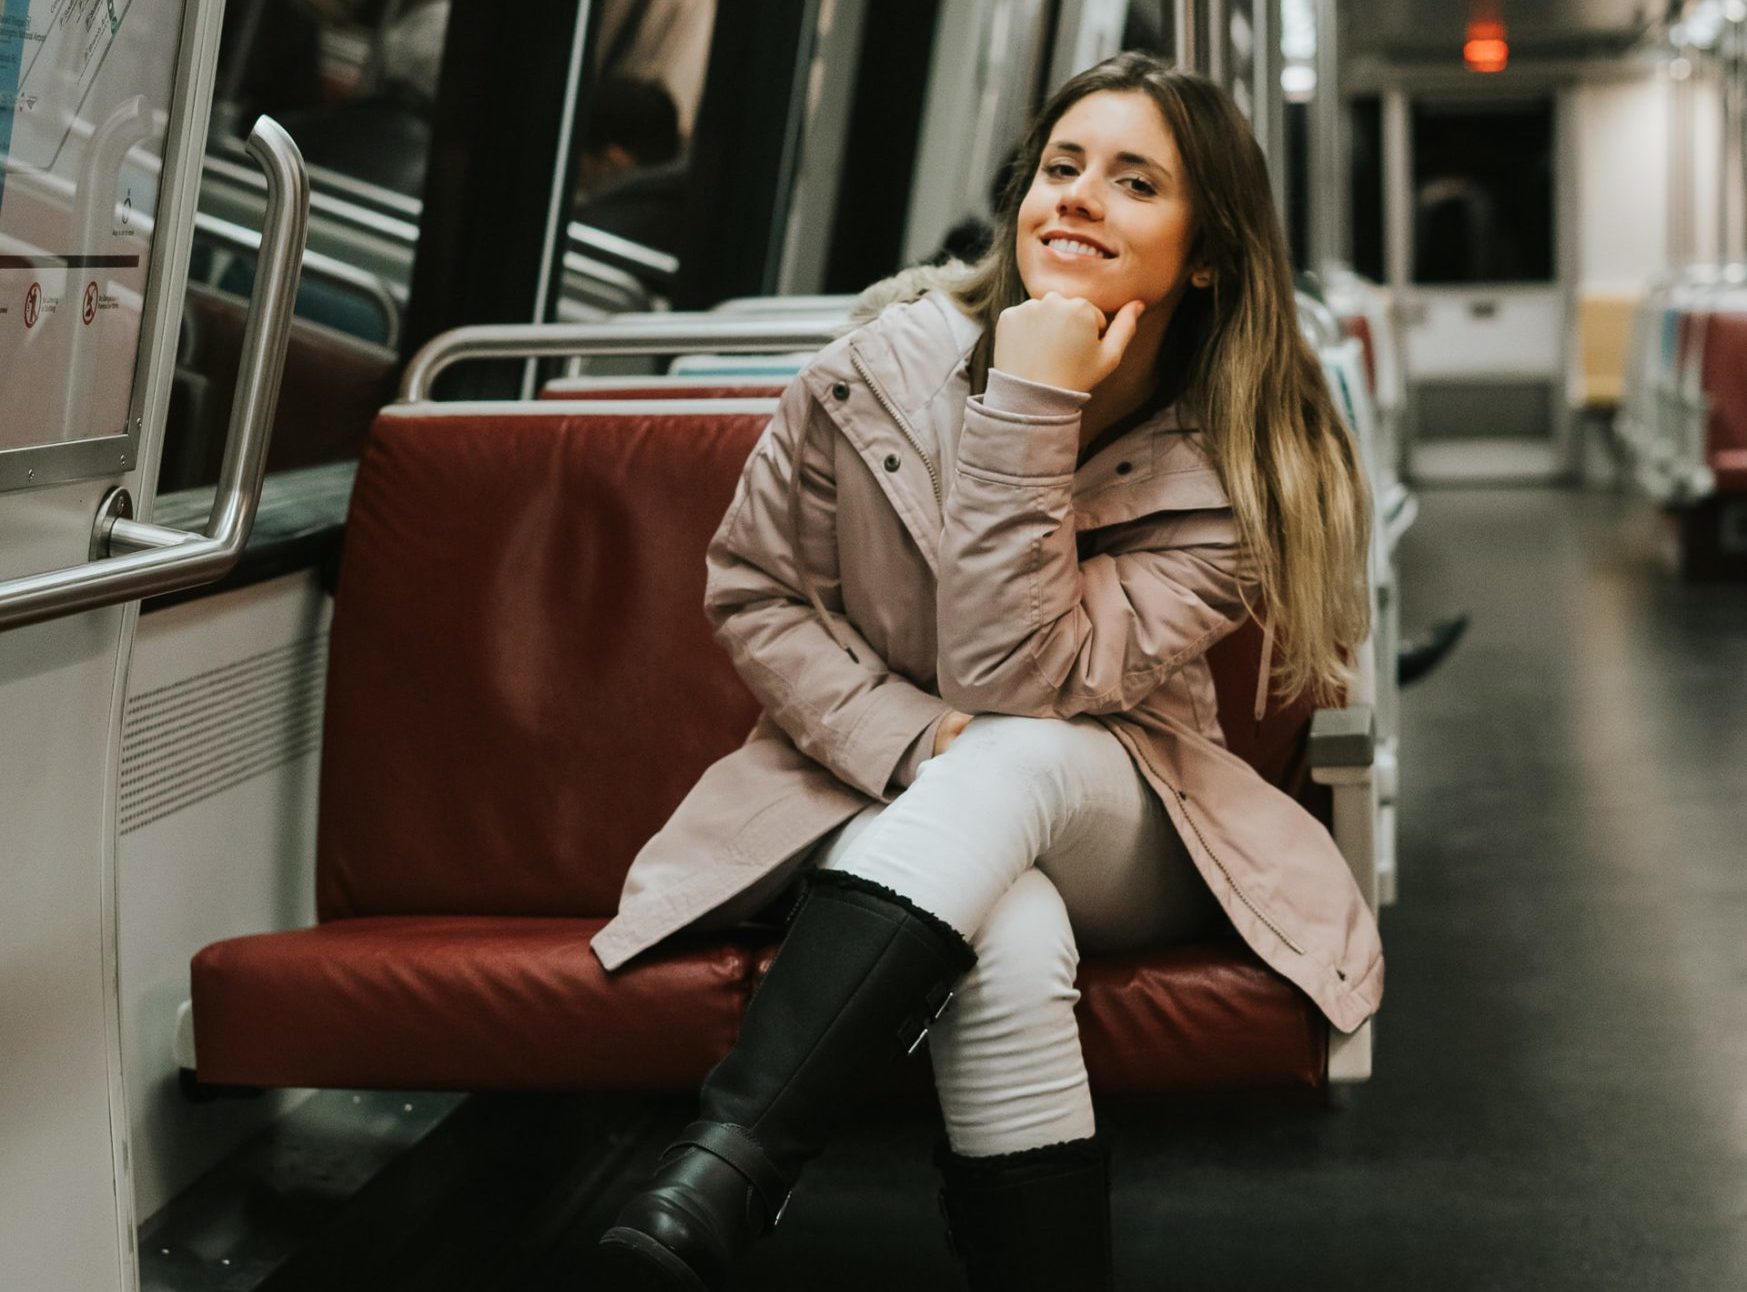 Young woman riding on a train.